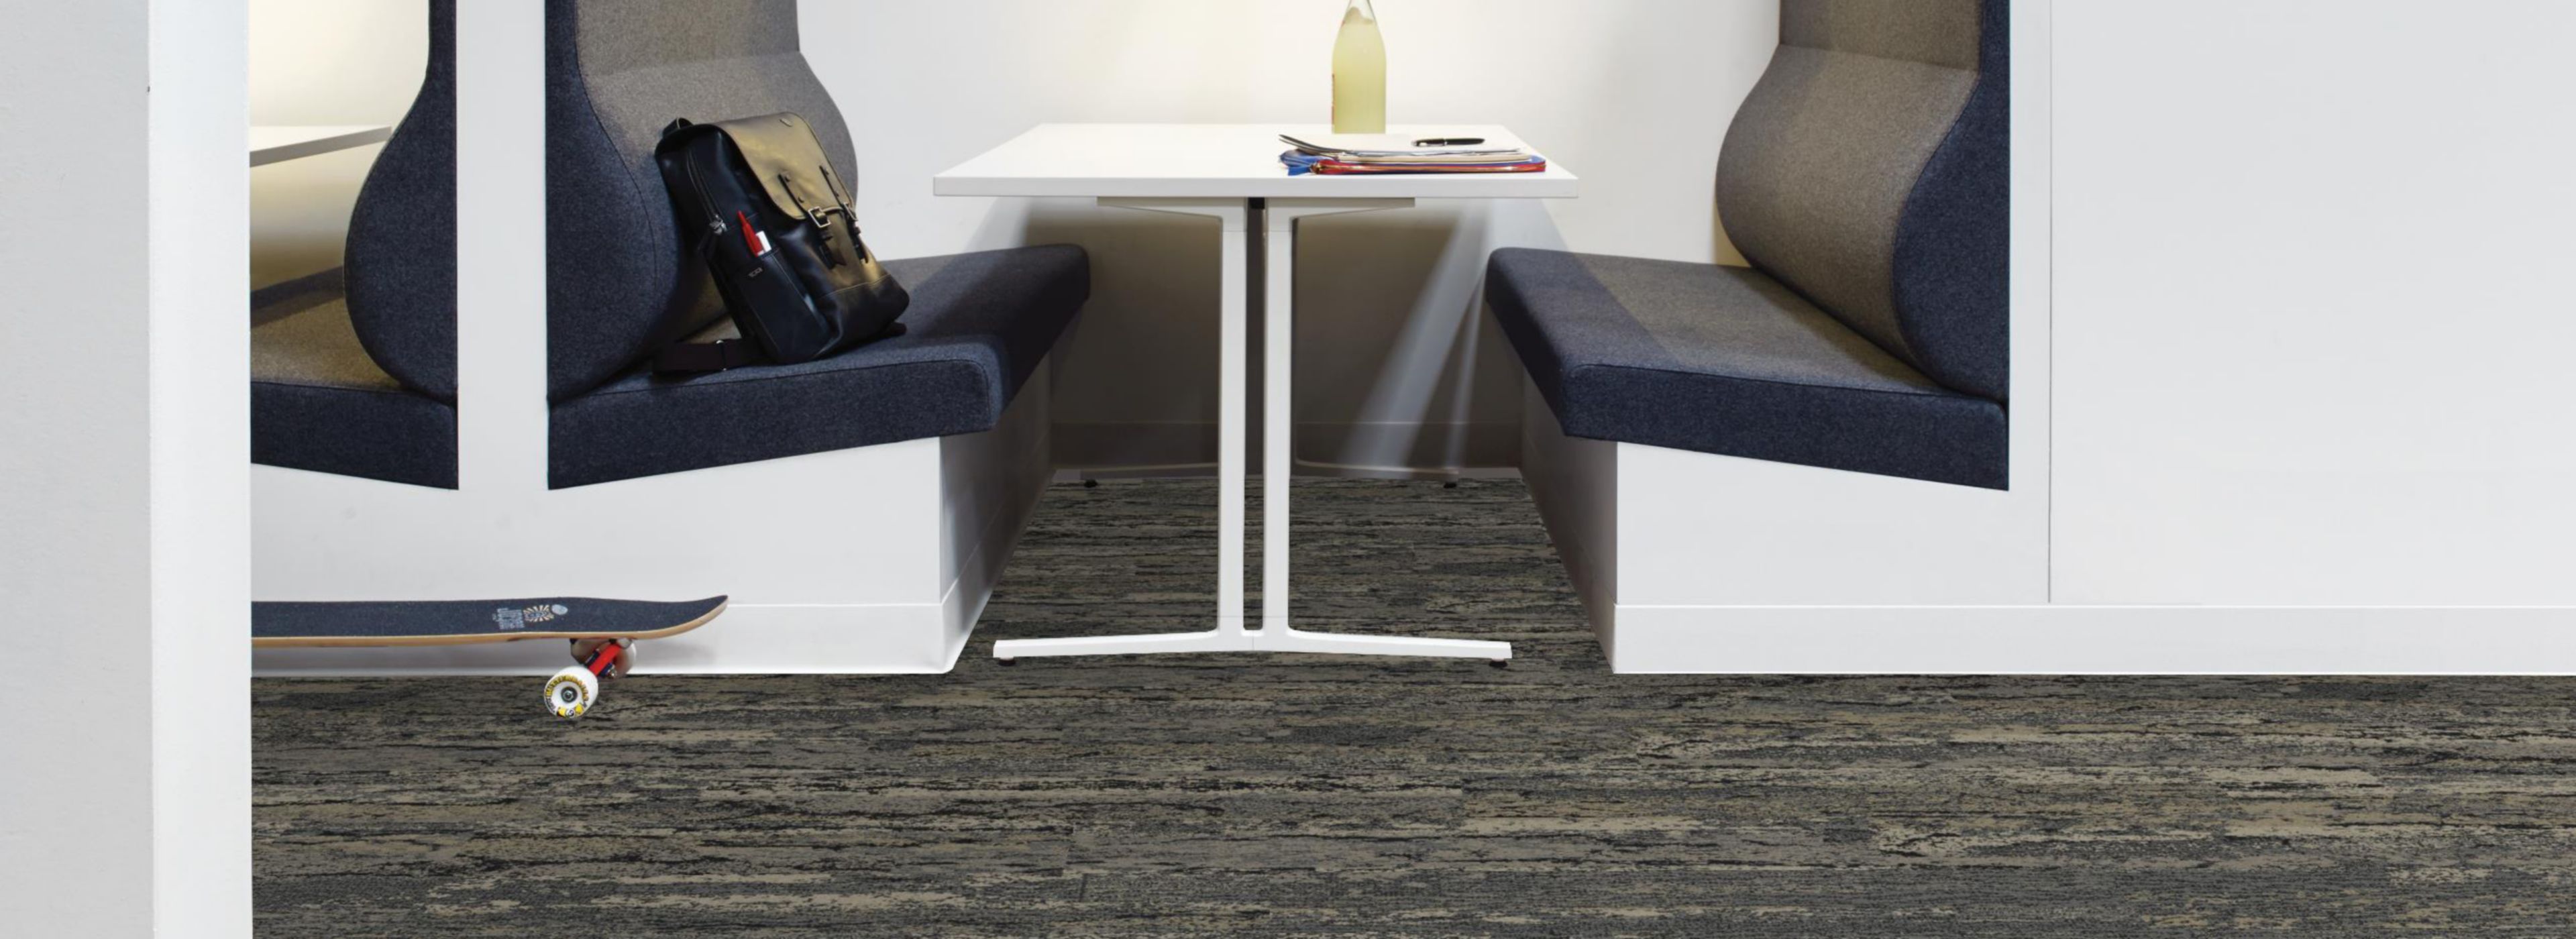 Interface Deeply Rooted, Uprooted and Velvet Bark plank carpet tile with booth seating imagen número 1